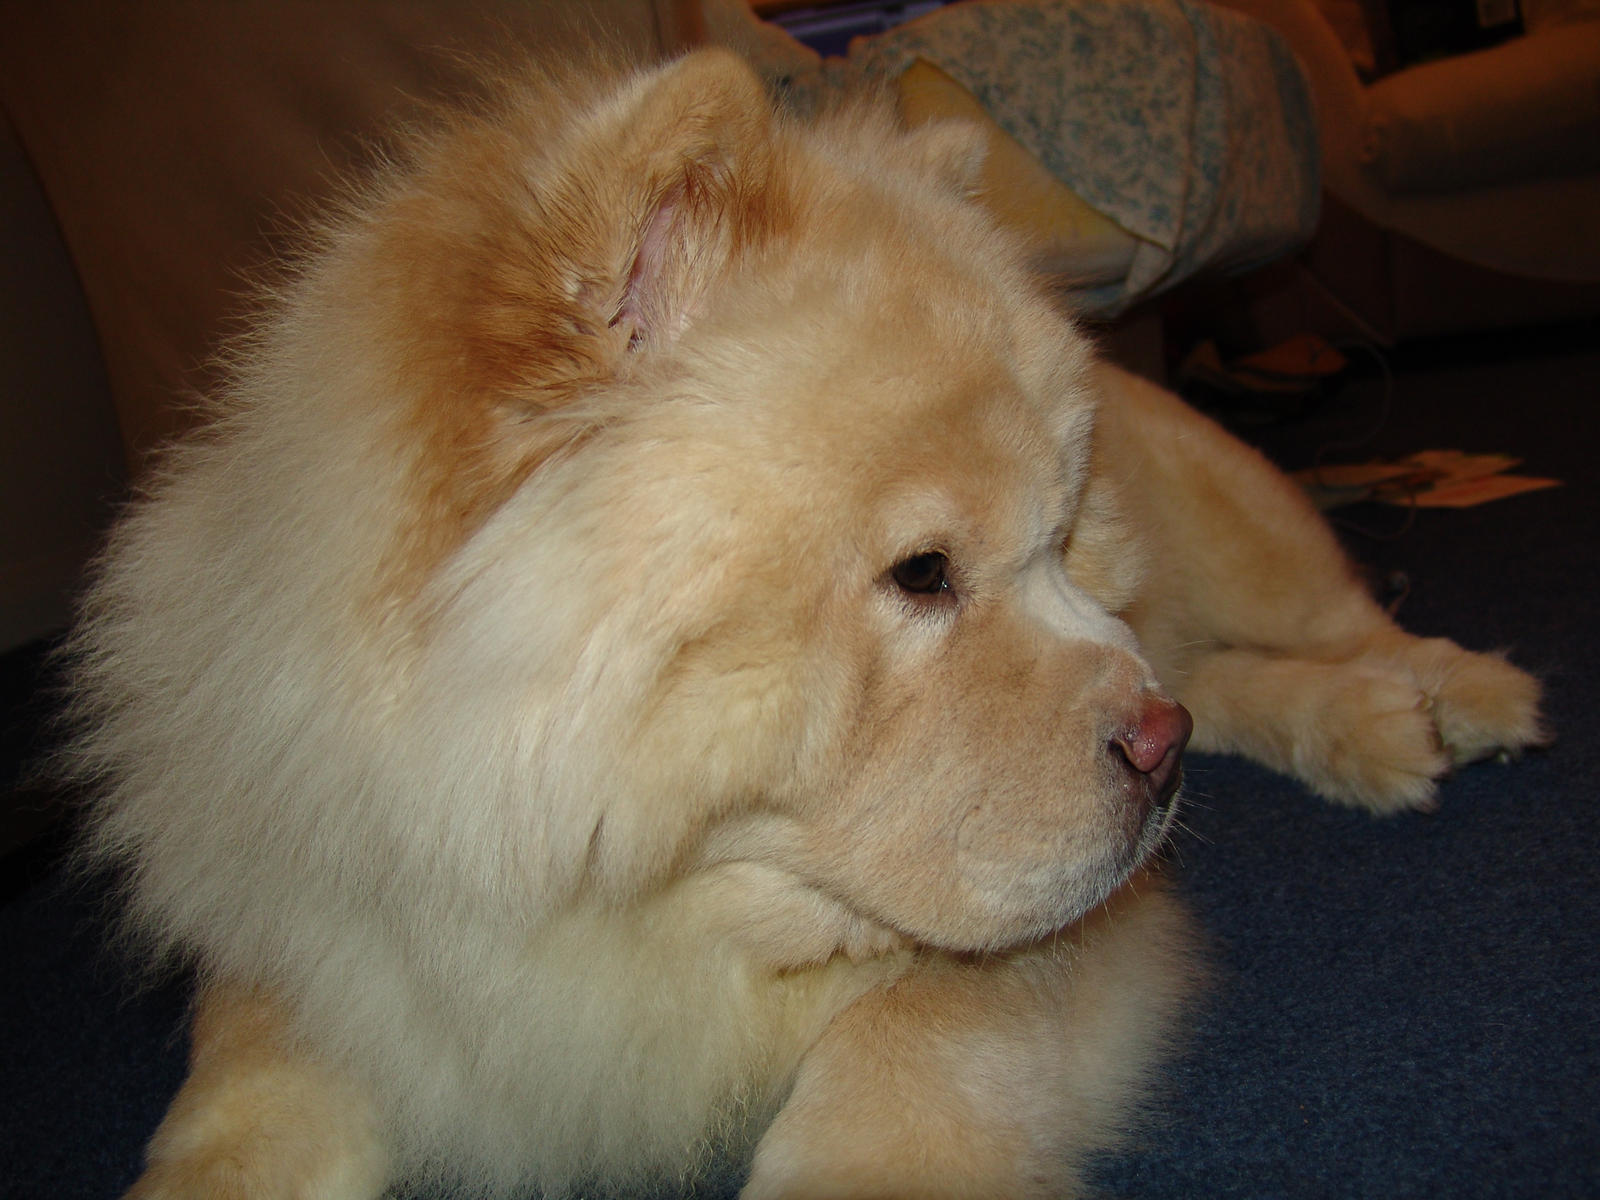 Cream Chow Chow by KinbesPhotography on DeviantArt